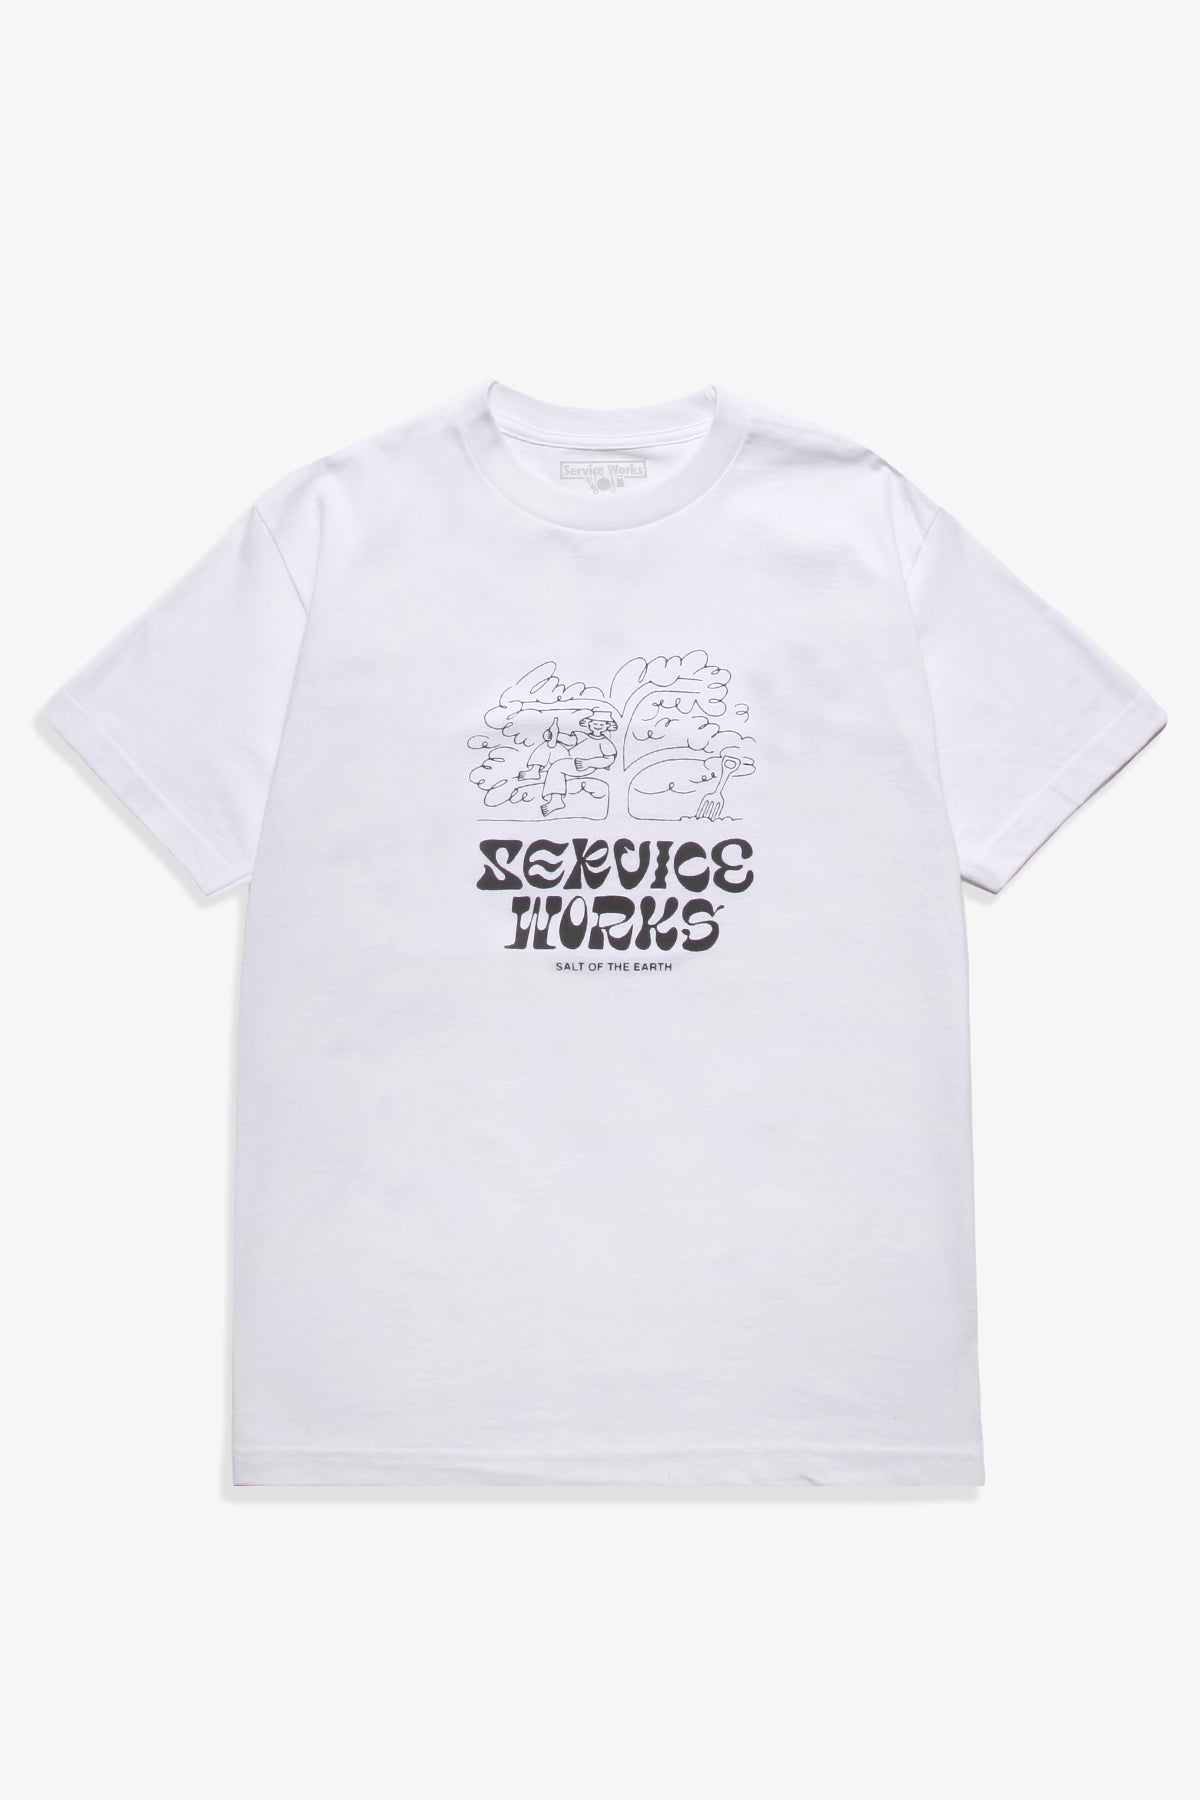 Service Works - Salt of the Earth Tee - White